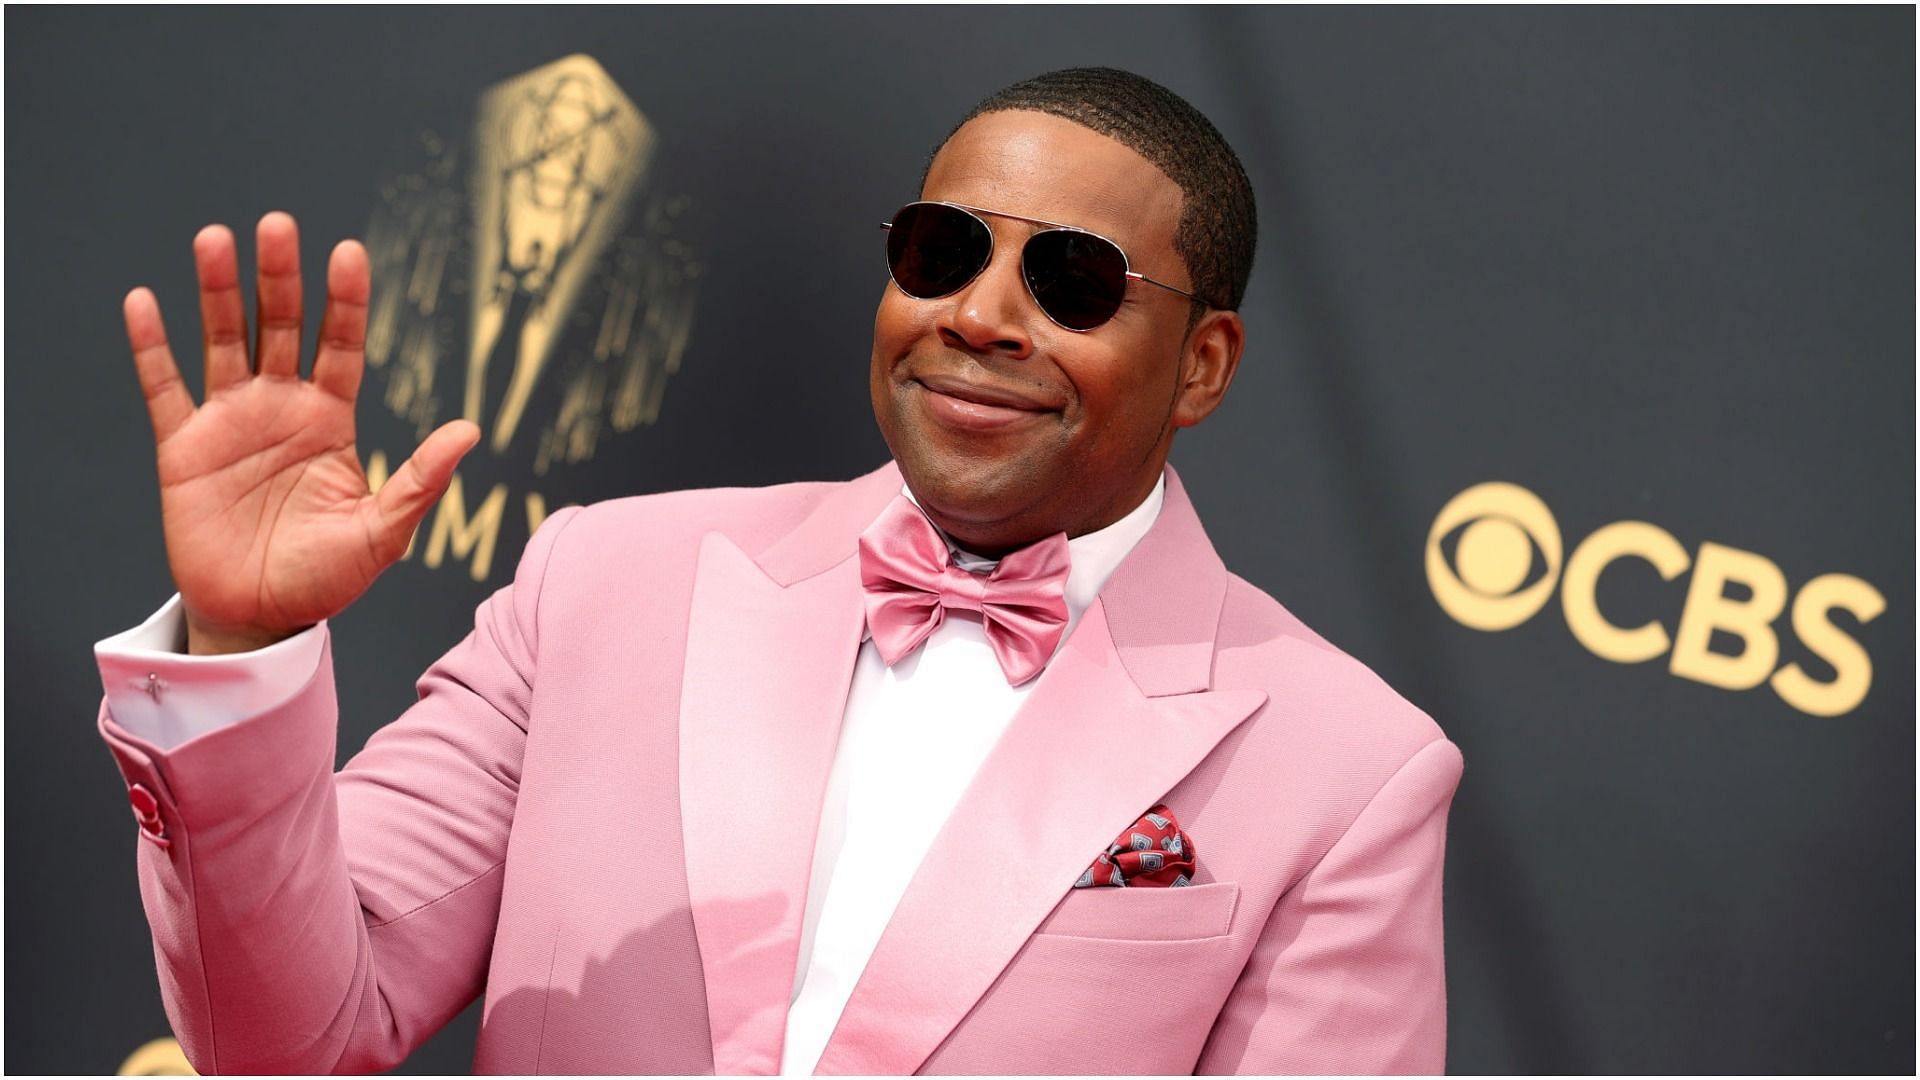 Kenan Thompson attends the 73rd Primetime Emmy Awards at L.A. LIVE on September 19, 2021 in Los Angeles, California (Image via Getty Images)